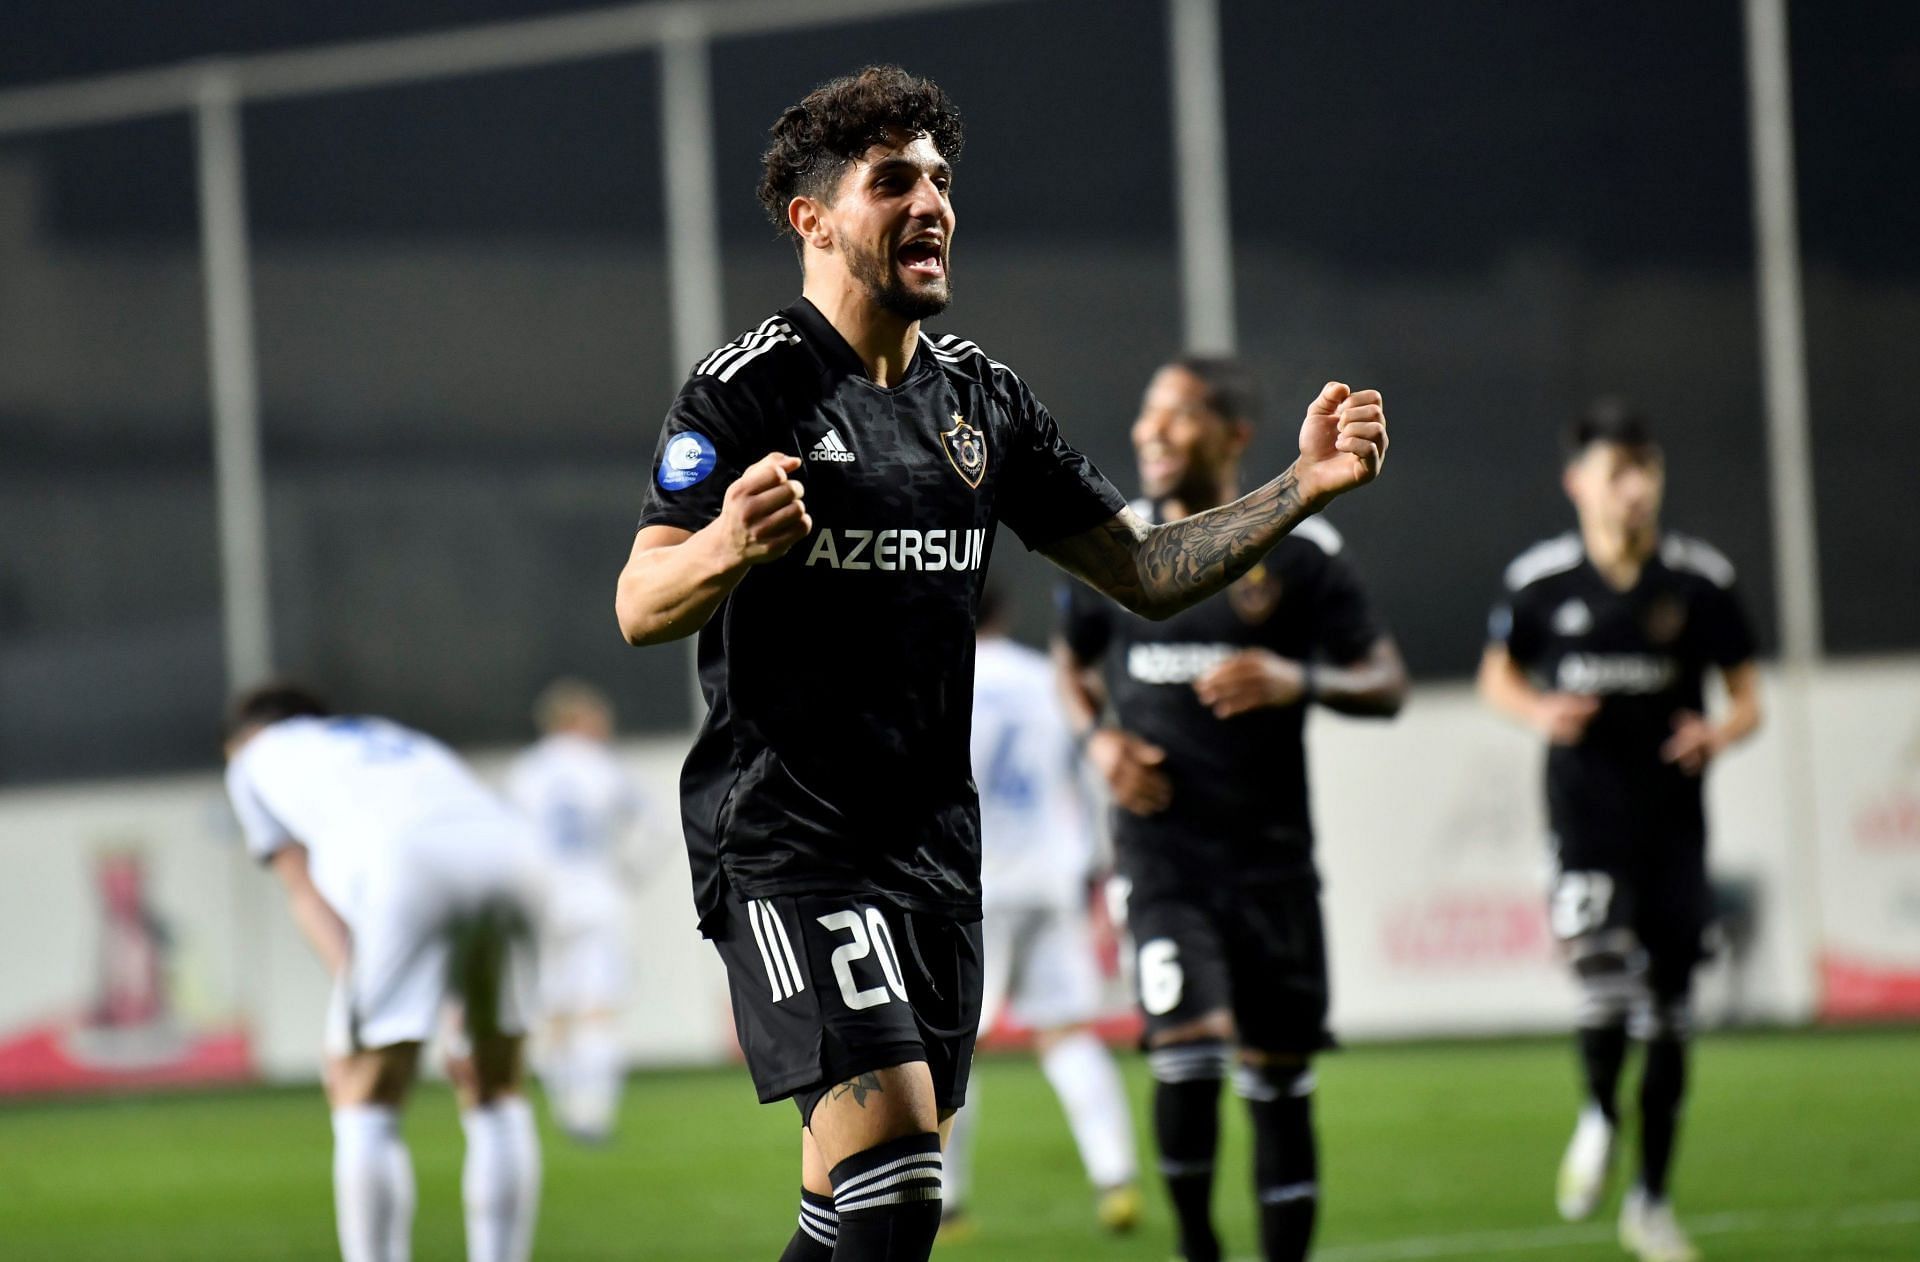 Qarabag need to protect their one-goal advantage against Zurich on Wednesday.